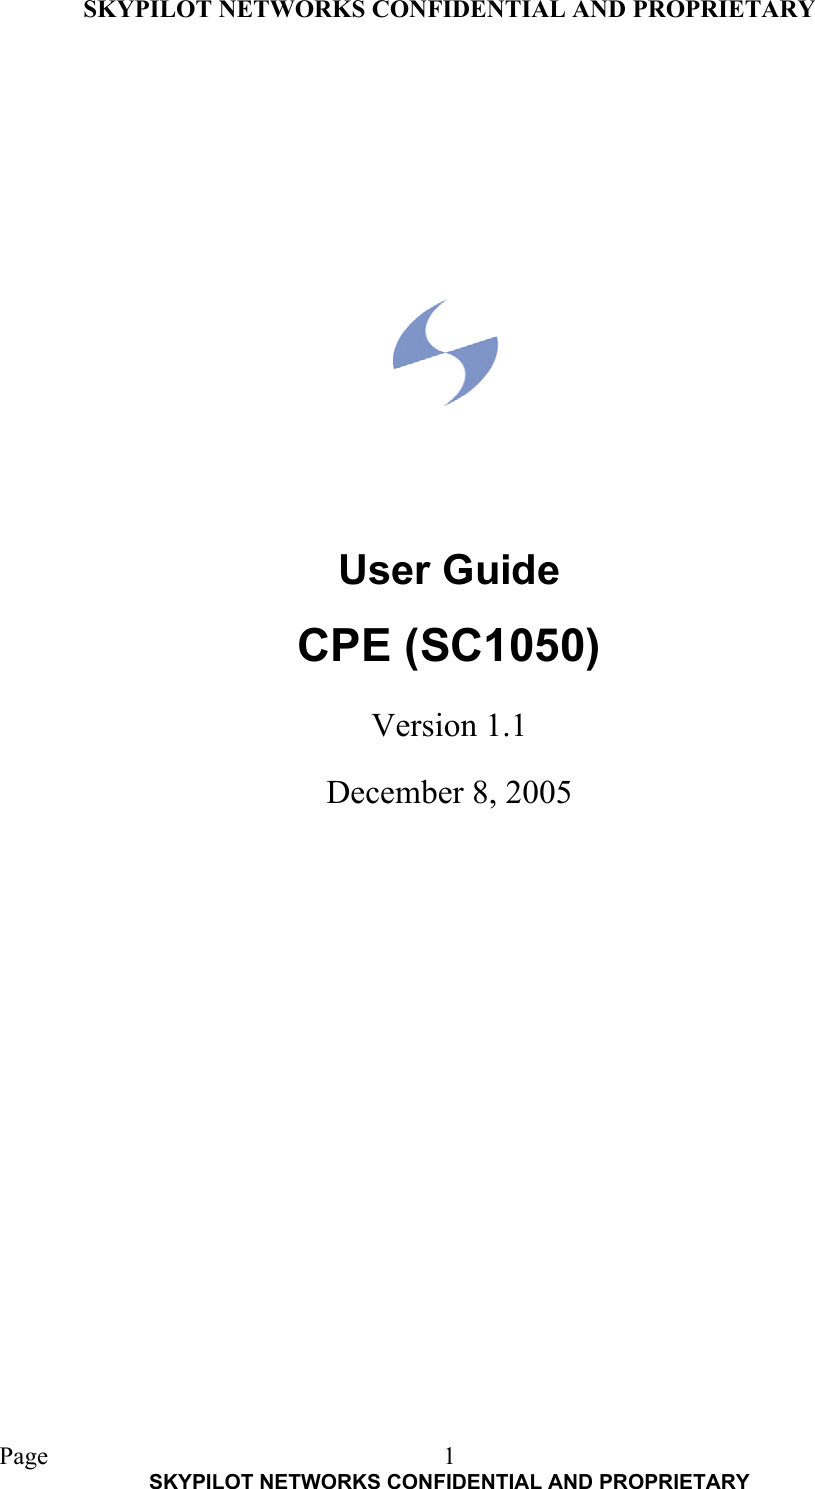 SKYPILOT NETWORKS CONFIDENTIAL AND PROPRIETARY  Page    SKYPILOT NETWORKS CONFIDENTIAL AND PROPRIETARY 1             User Guide CPE (SC1050)  Version 1.1  December 8, 2005  